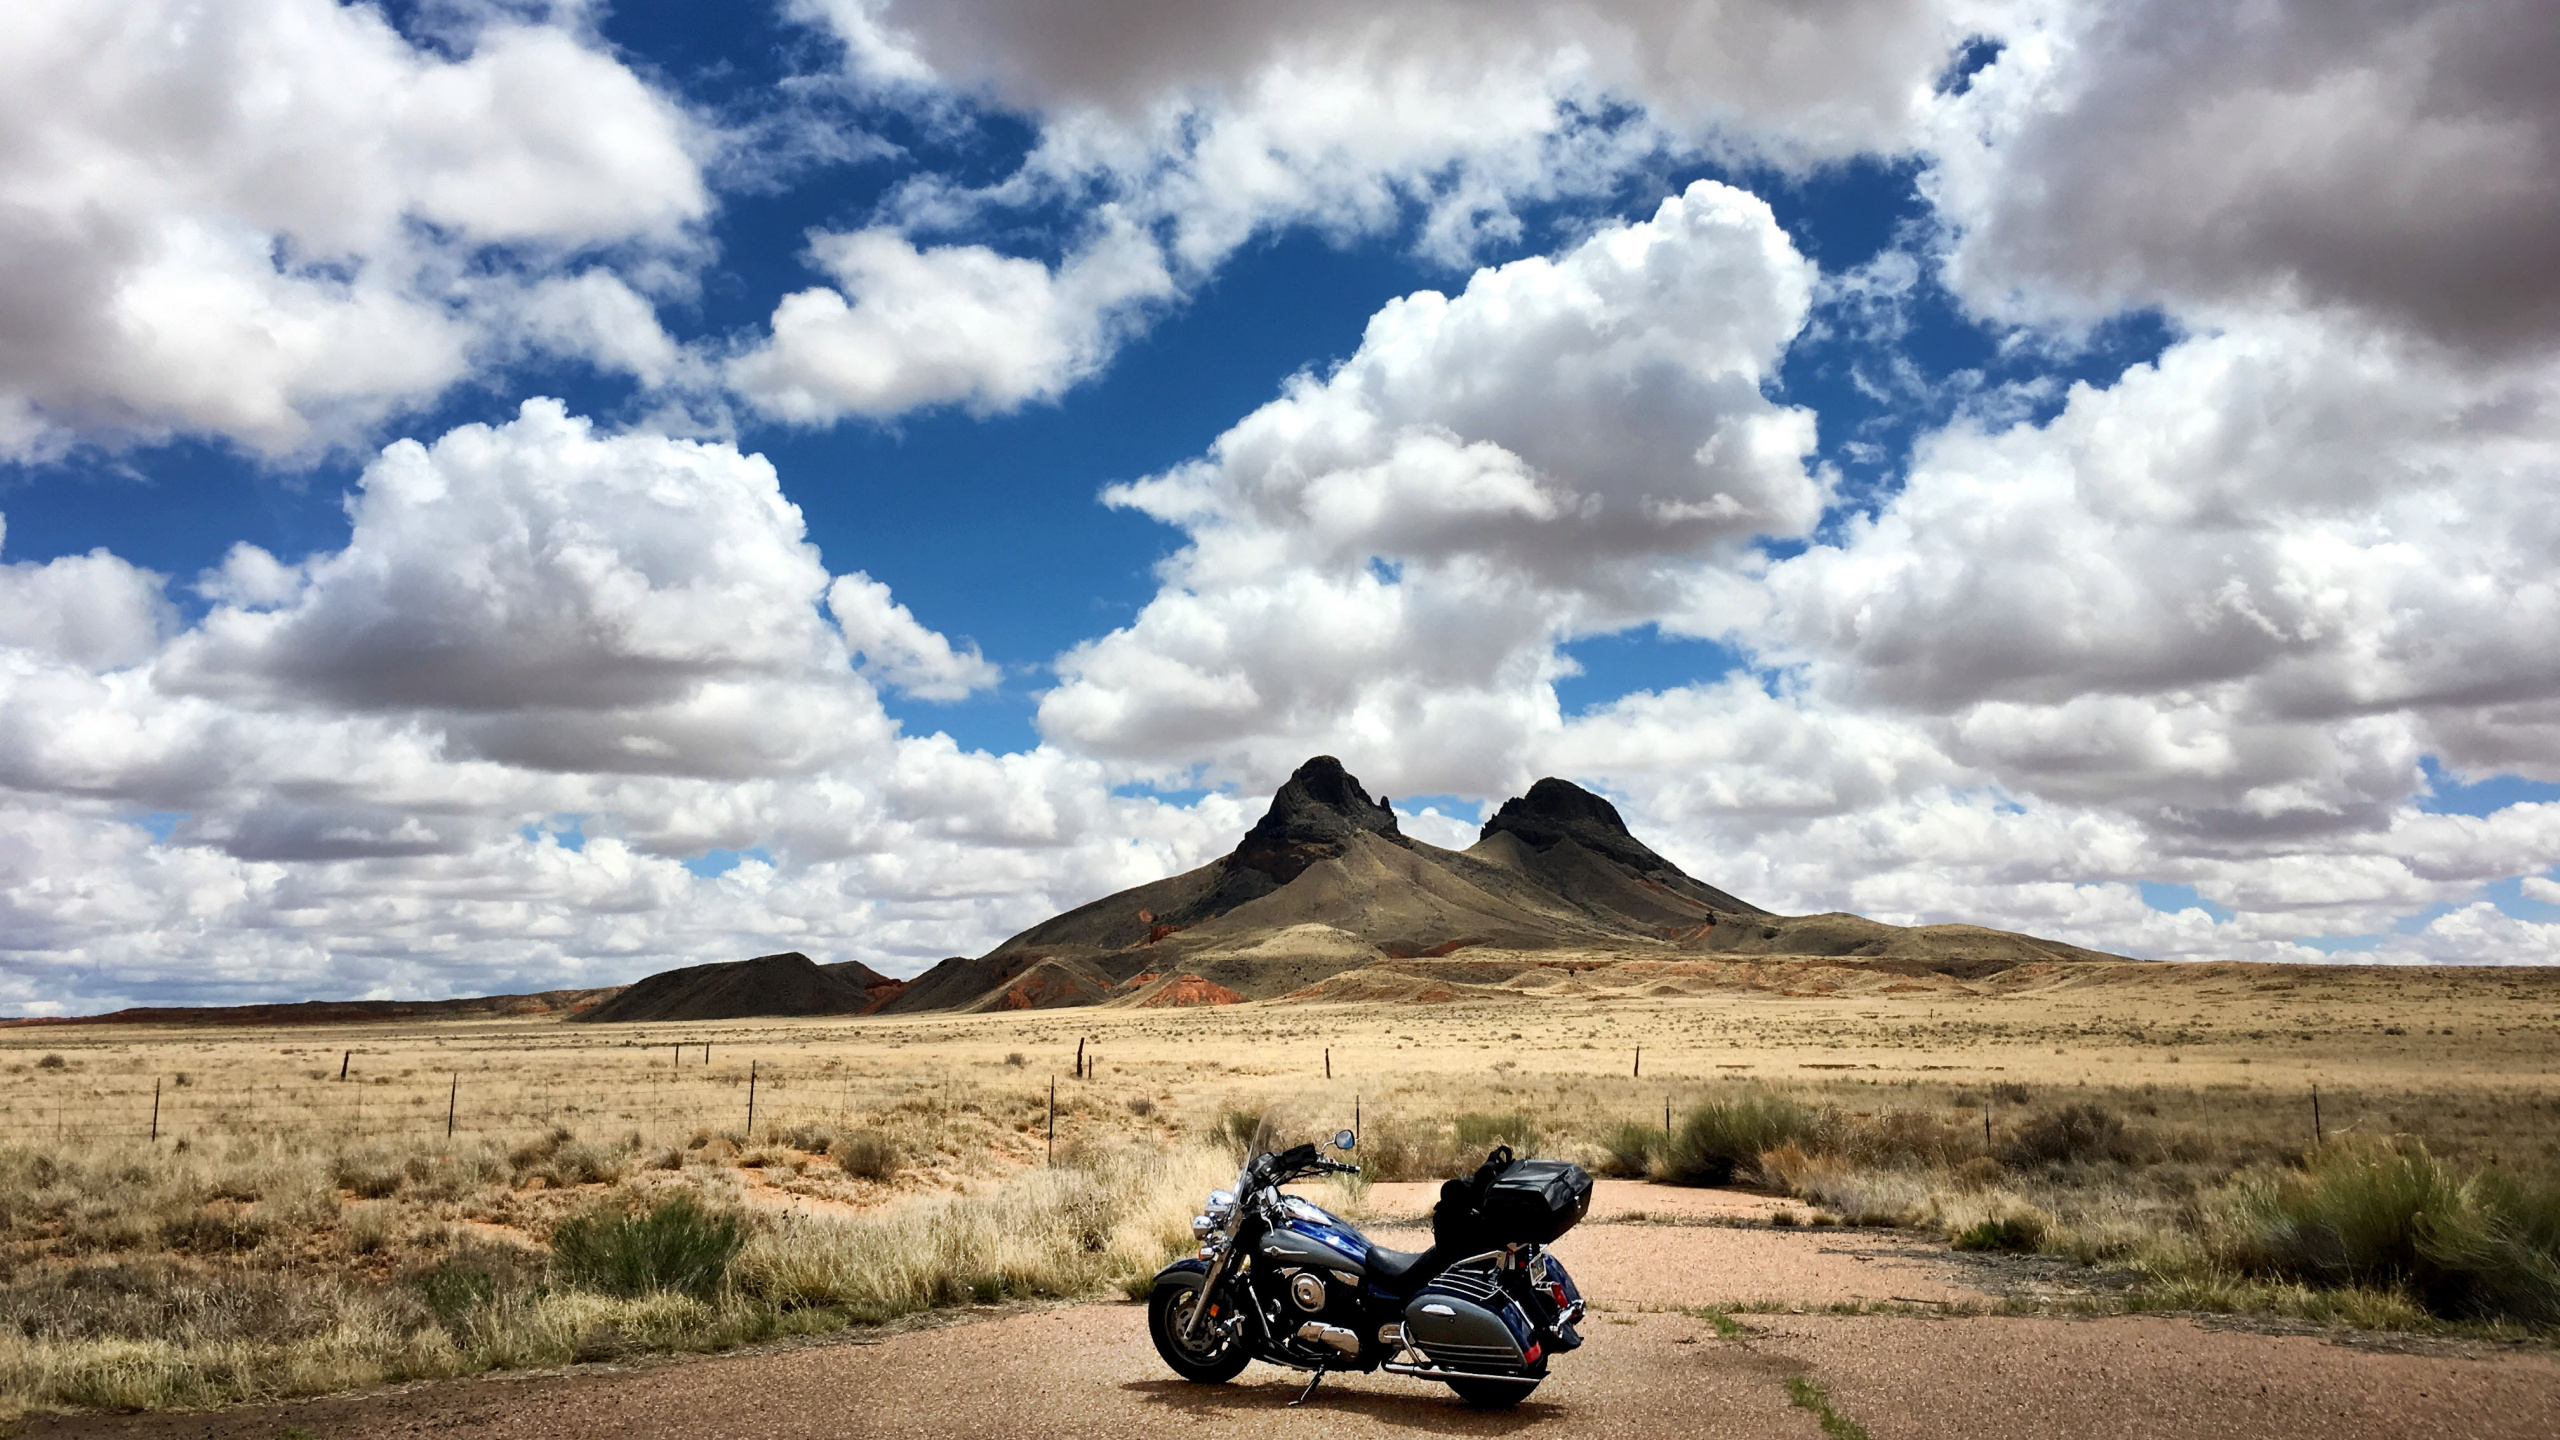 Black Motorcycle on Brown Field Under White Clouds and Blue Sky During Daytime. Wallpaper in 2560x1440 Resolution